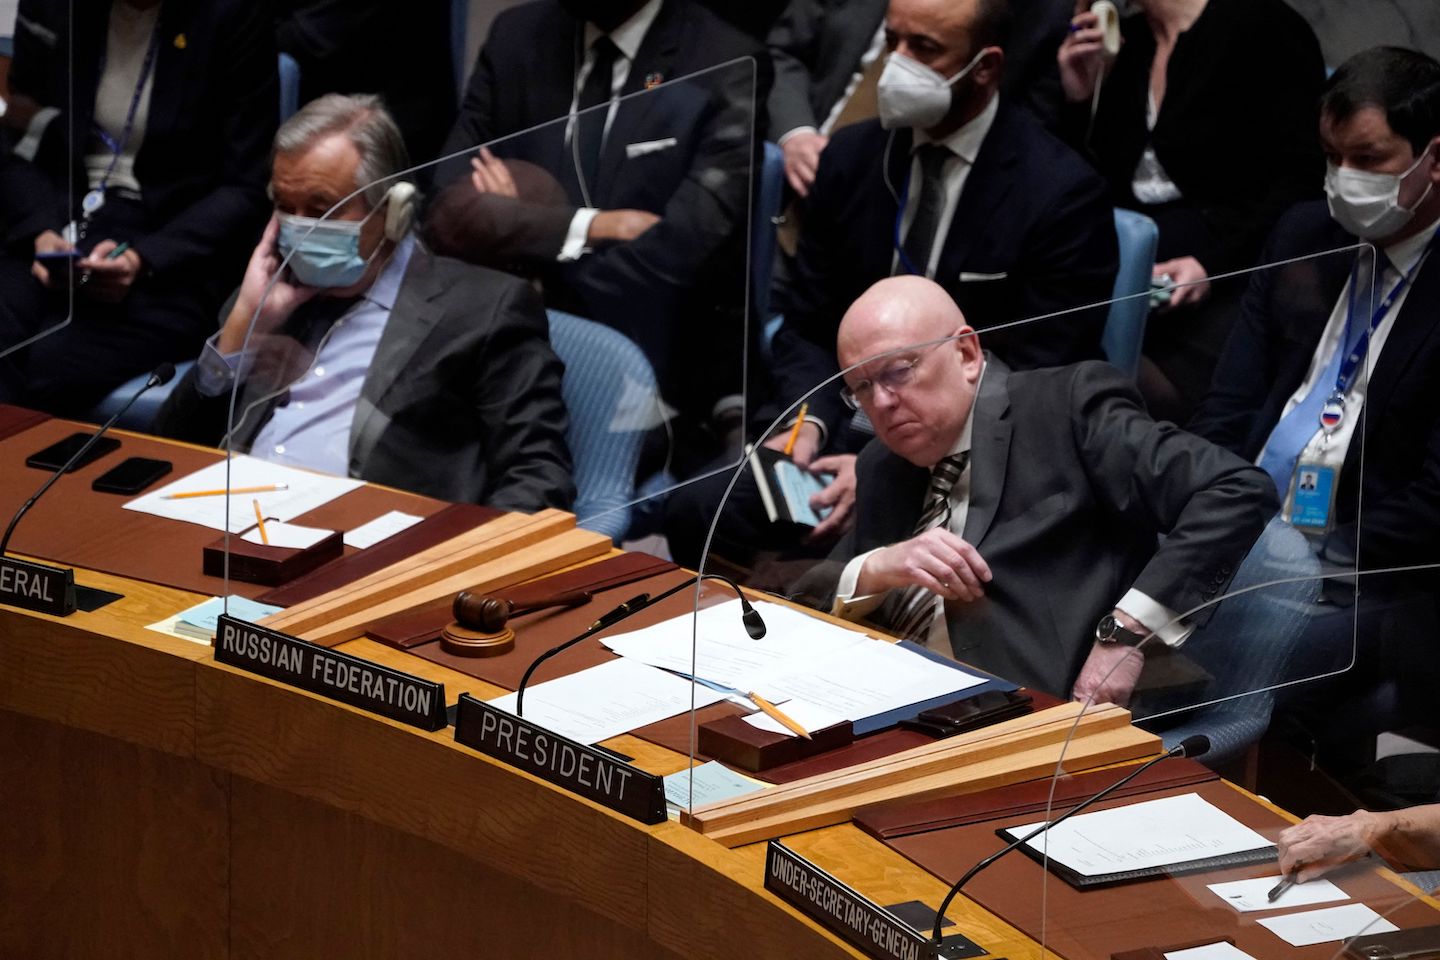 Russian ambassador Vasily Nebenzya refused to acknowledge that Russian forces were attacking Ukrainian cities. Photo: TIMOTHY A. CLARY/AFP via Getty Images